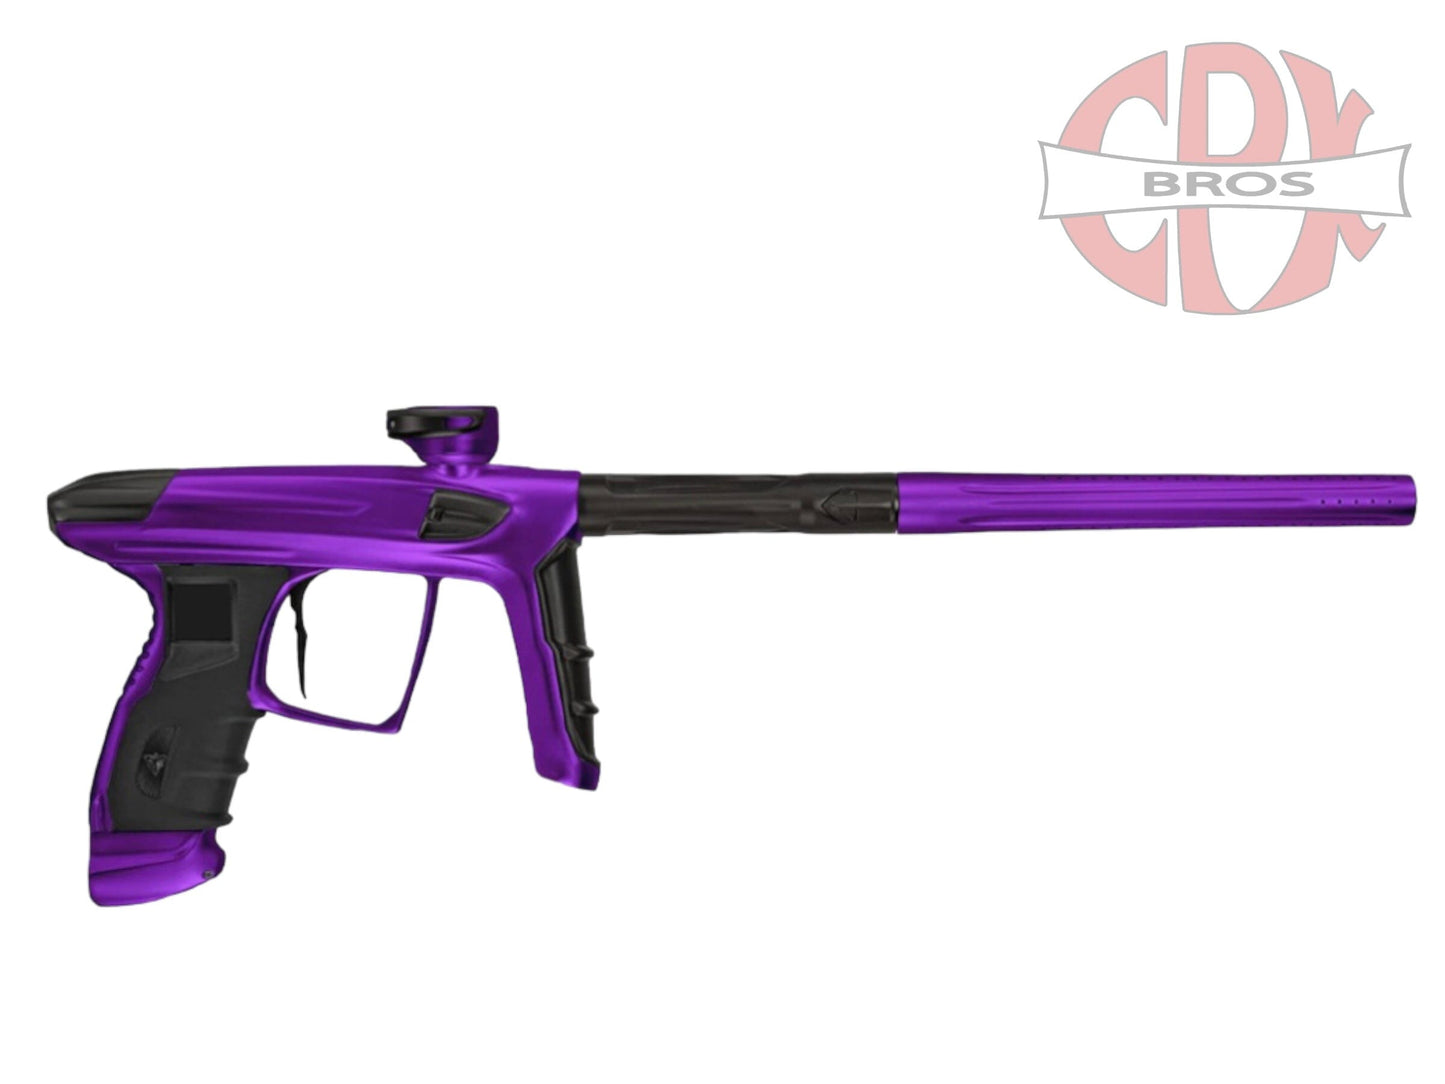 Used DLX Luxe IDOL Purple/Dust Black Paintball Gun from CPXBrosPaintball Buy/Sell/Trade Paintball Markers, New Paintball Guns, Paintball Hoppers, Paintball Masks, and Hormesis Headbands